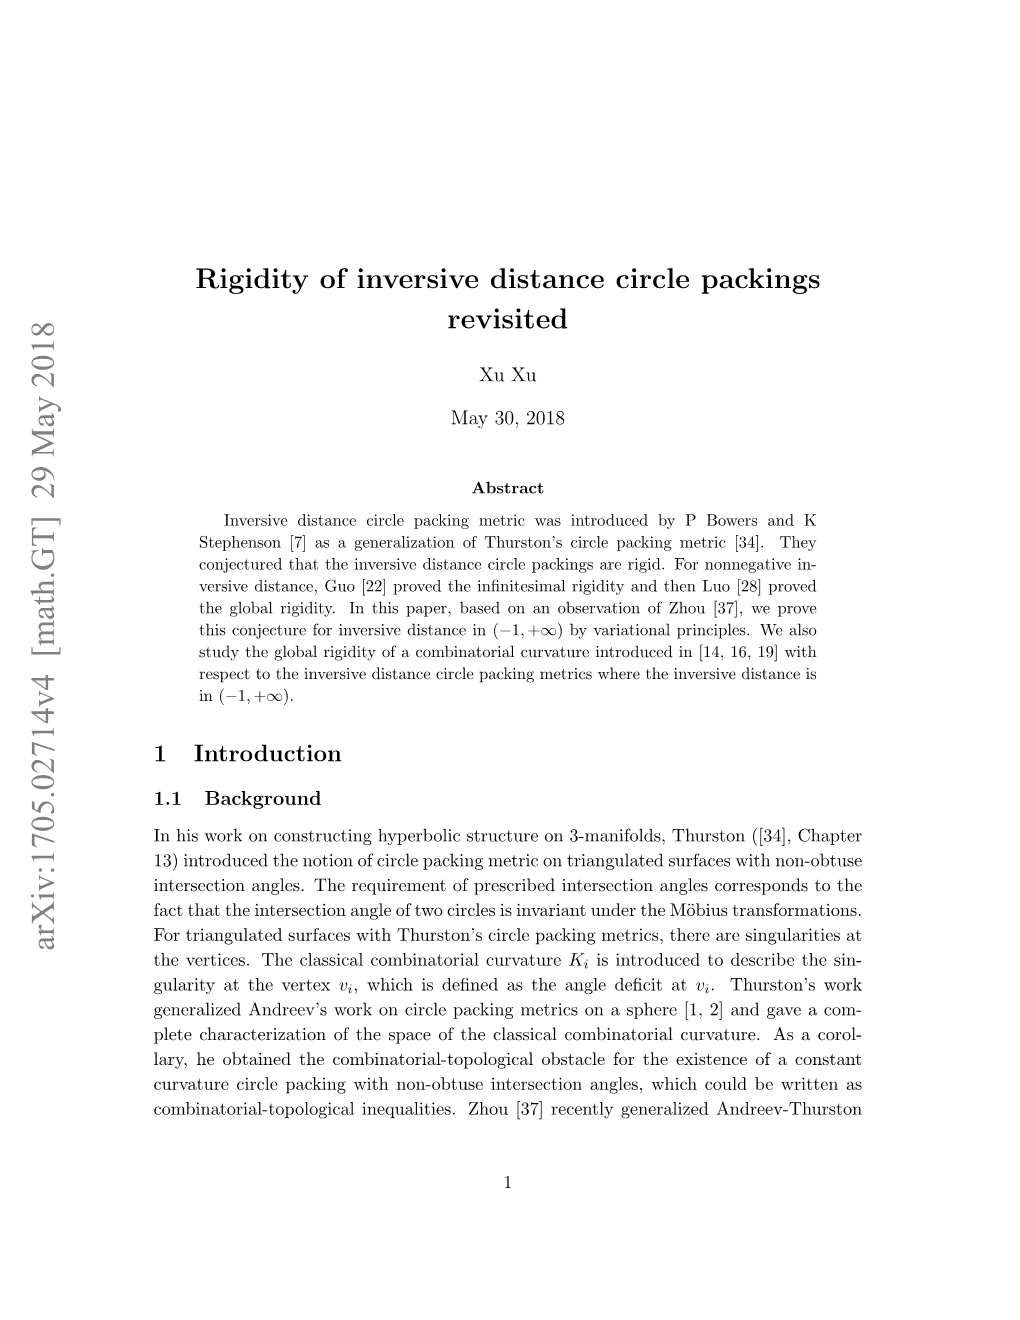 Rigidity of Inversive Distance Circle Packings Revisited